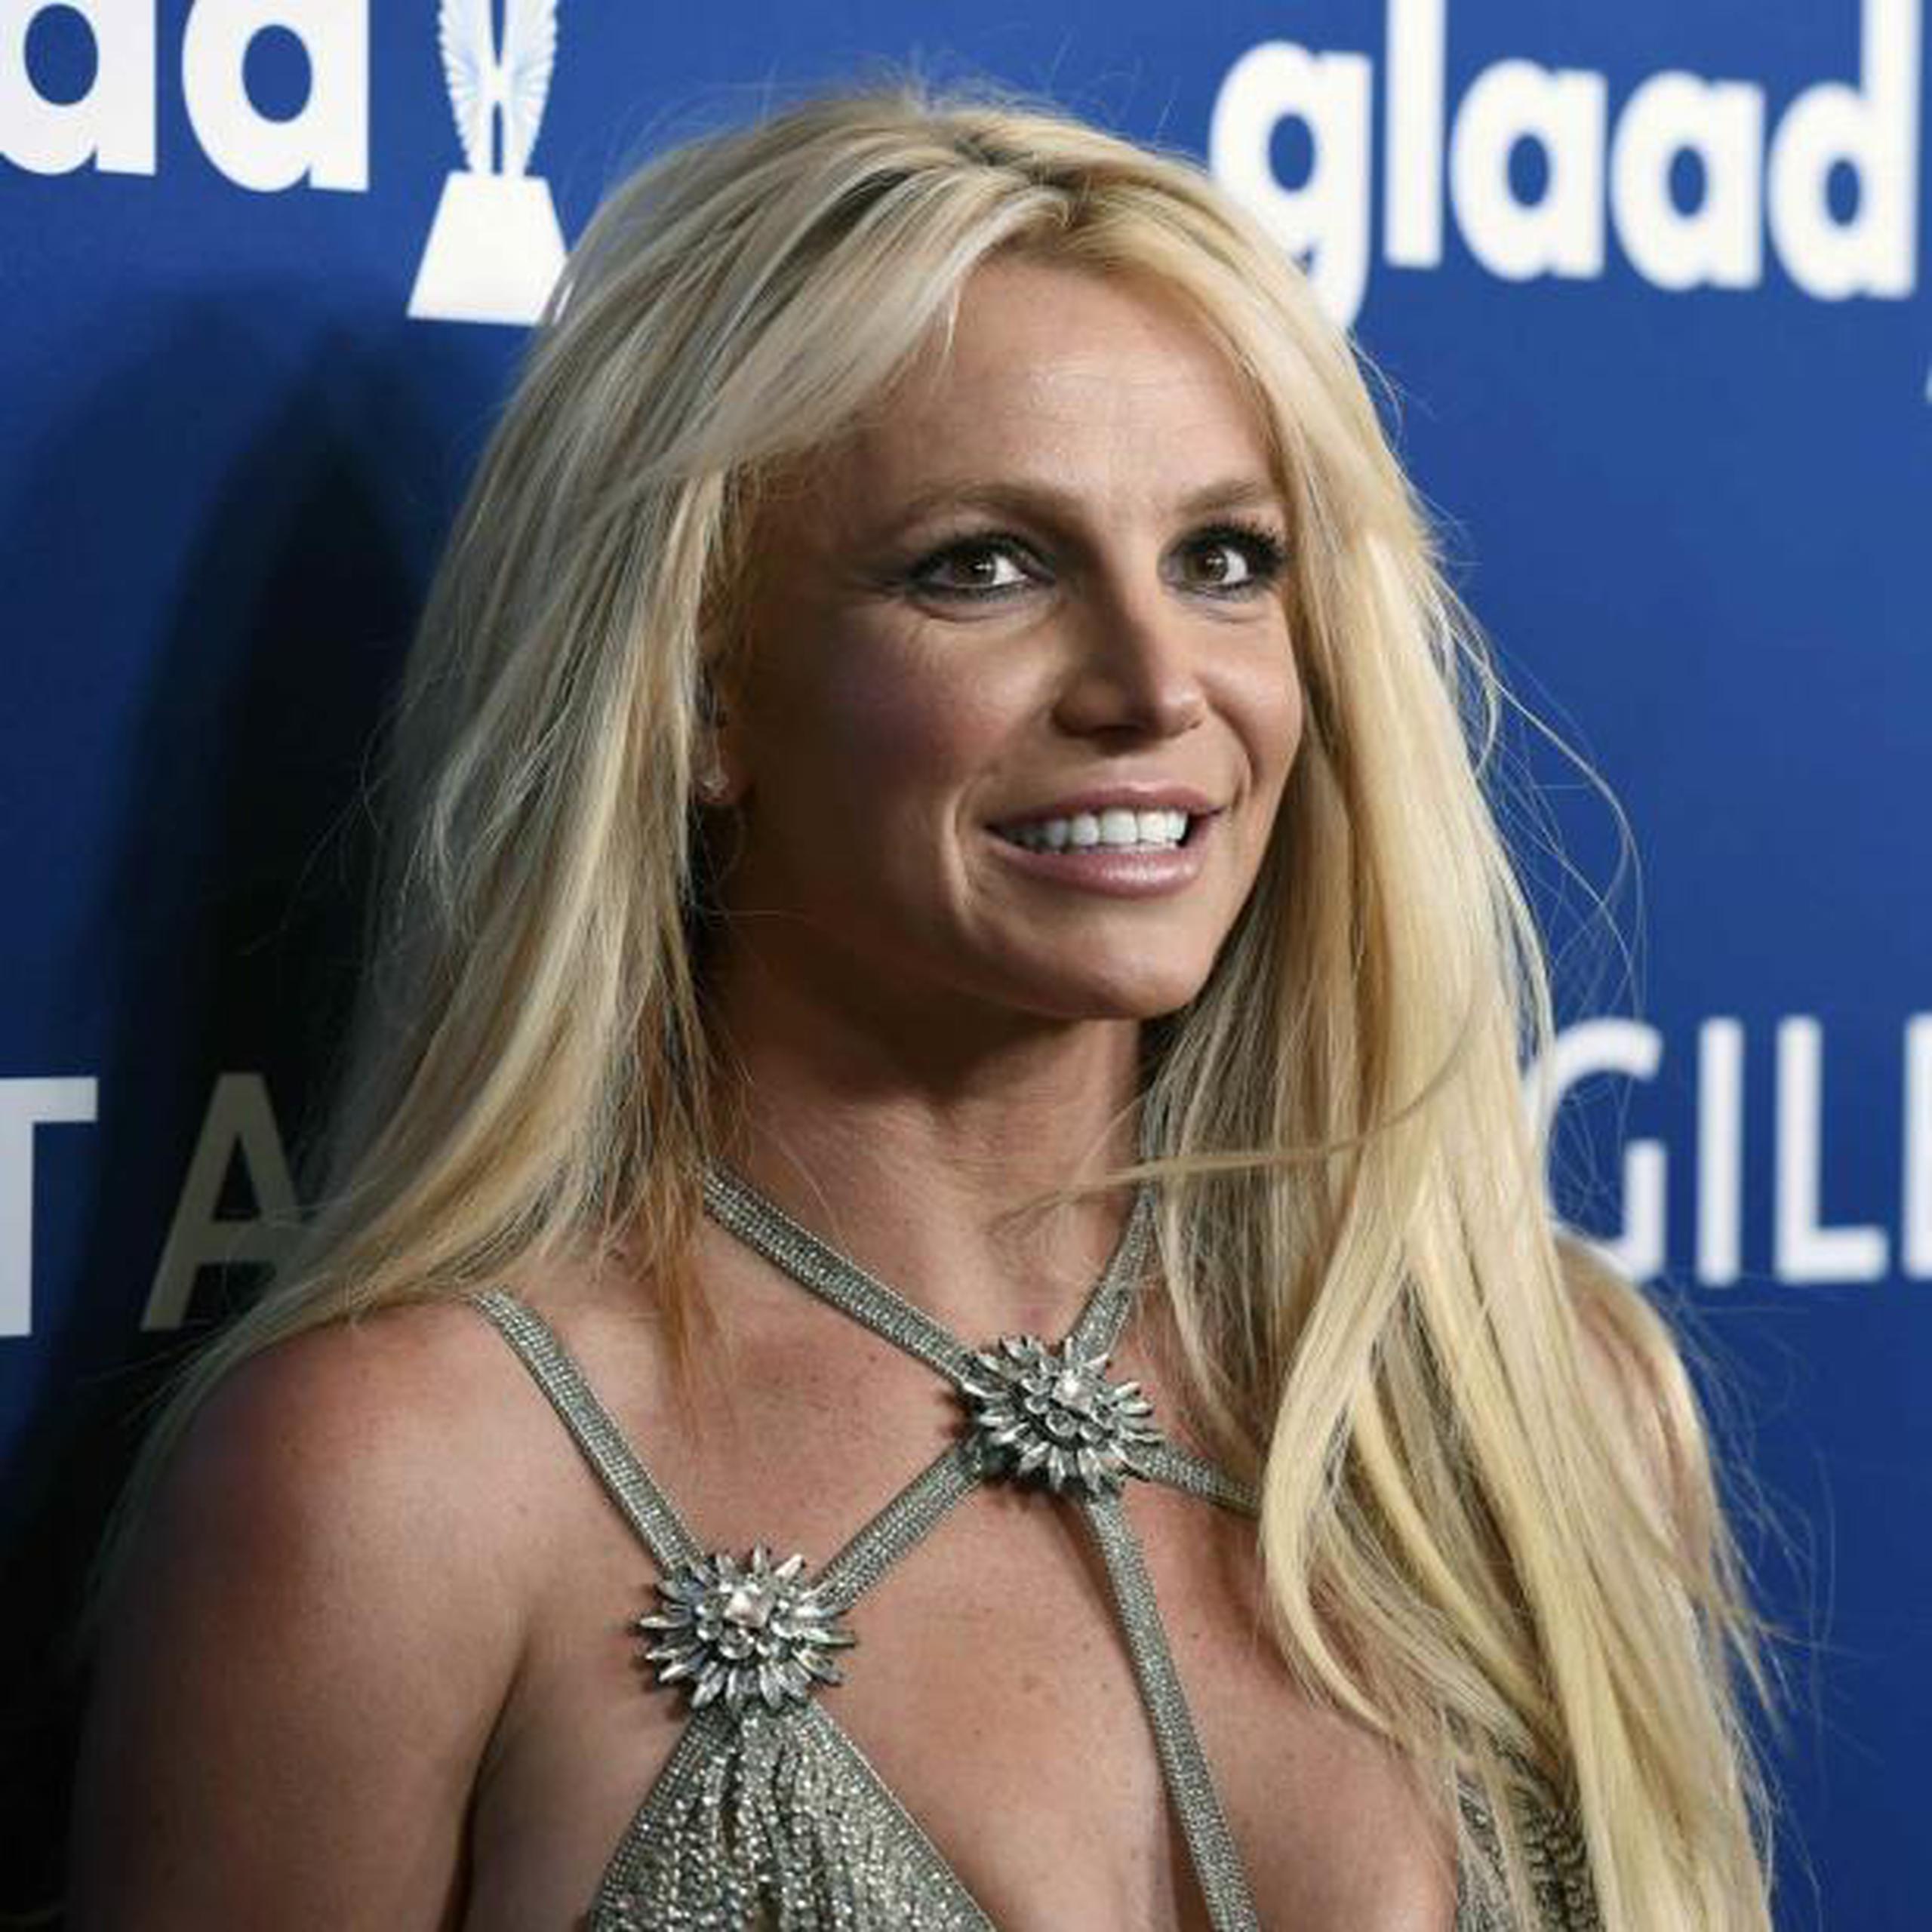 Britney Spears. (Chris Pizzello / Invision / AP)